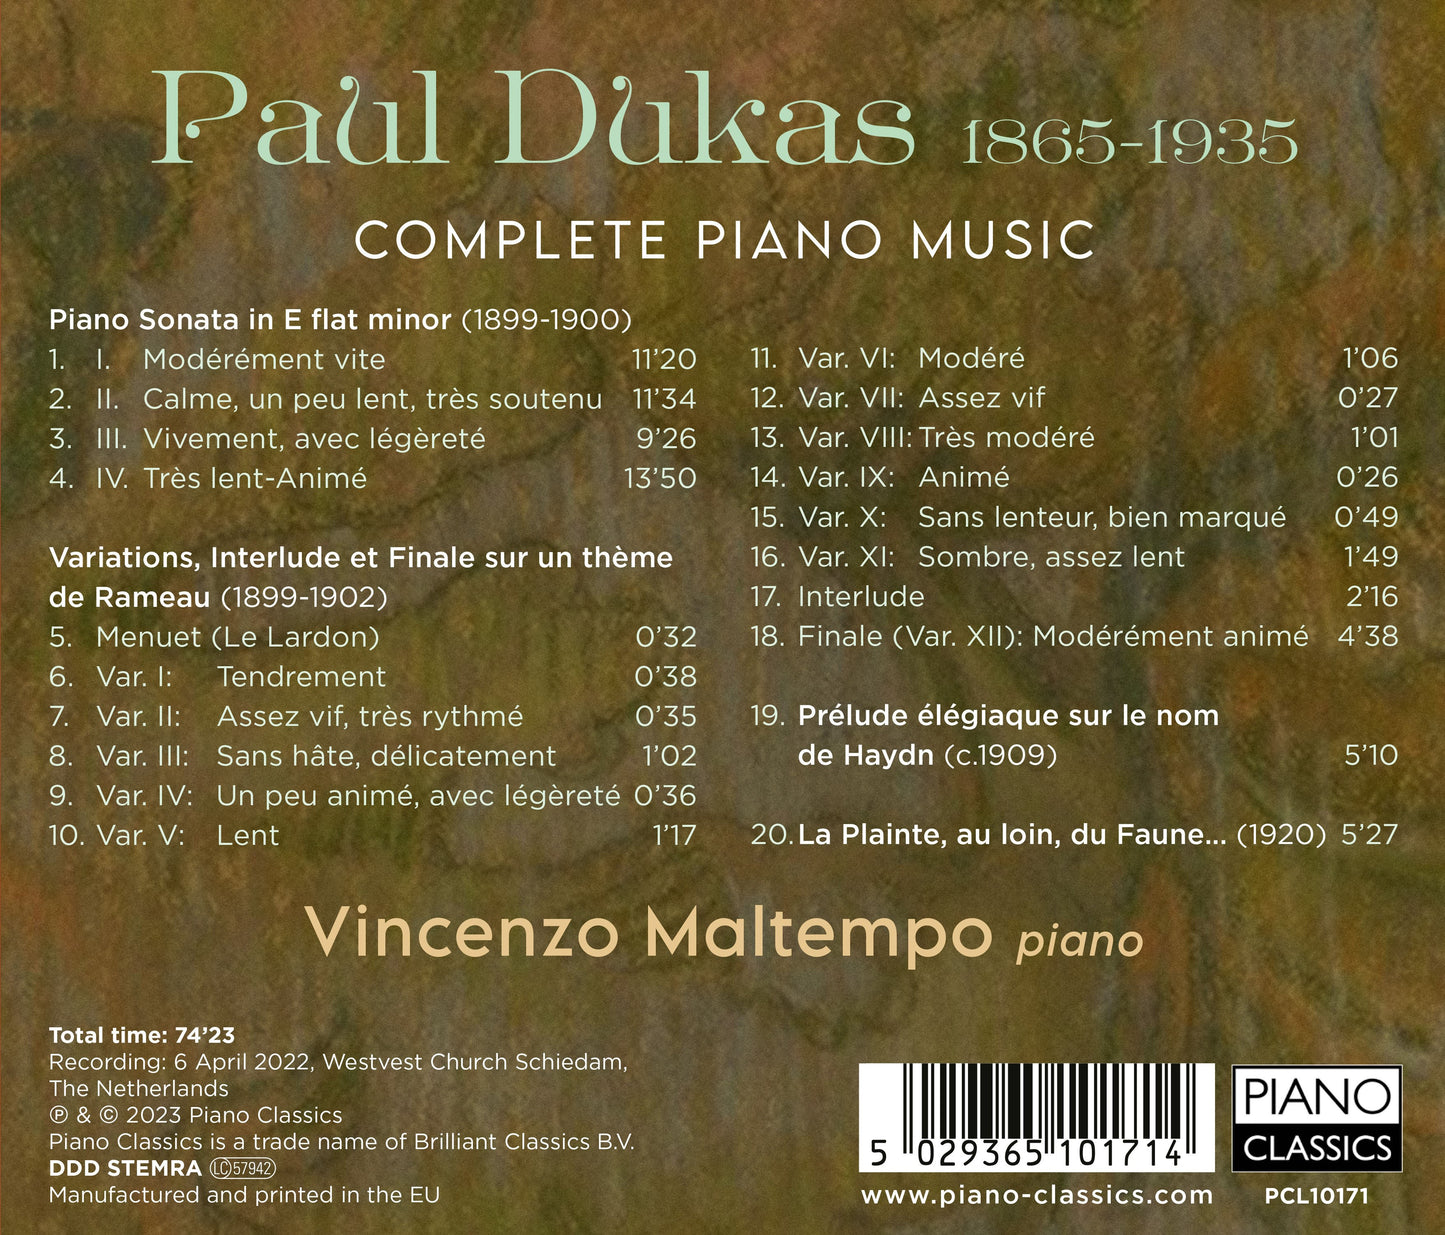 Dukas: Complete Piano Music